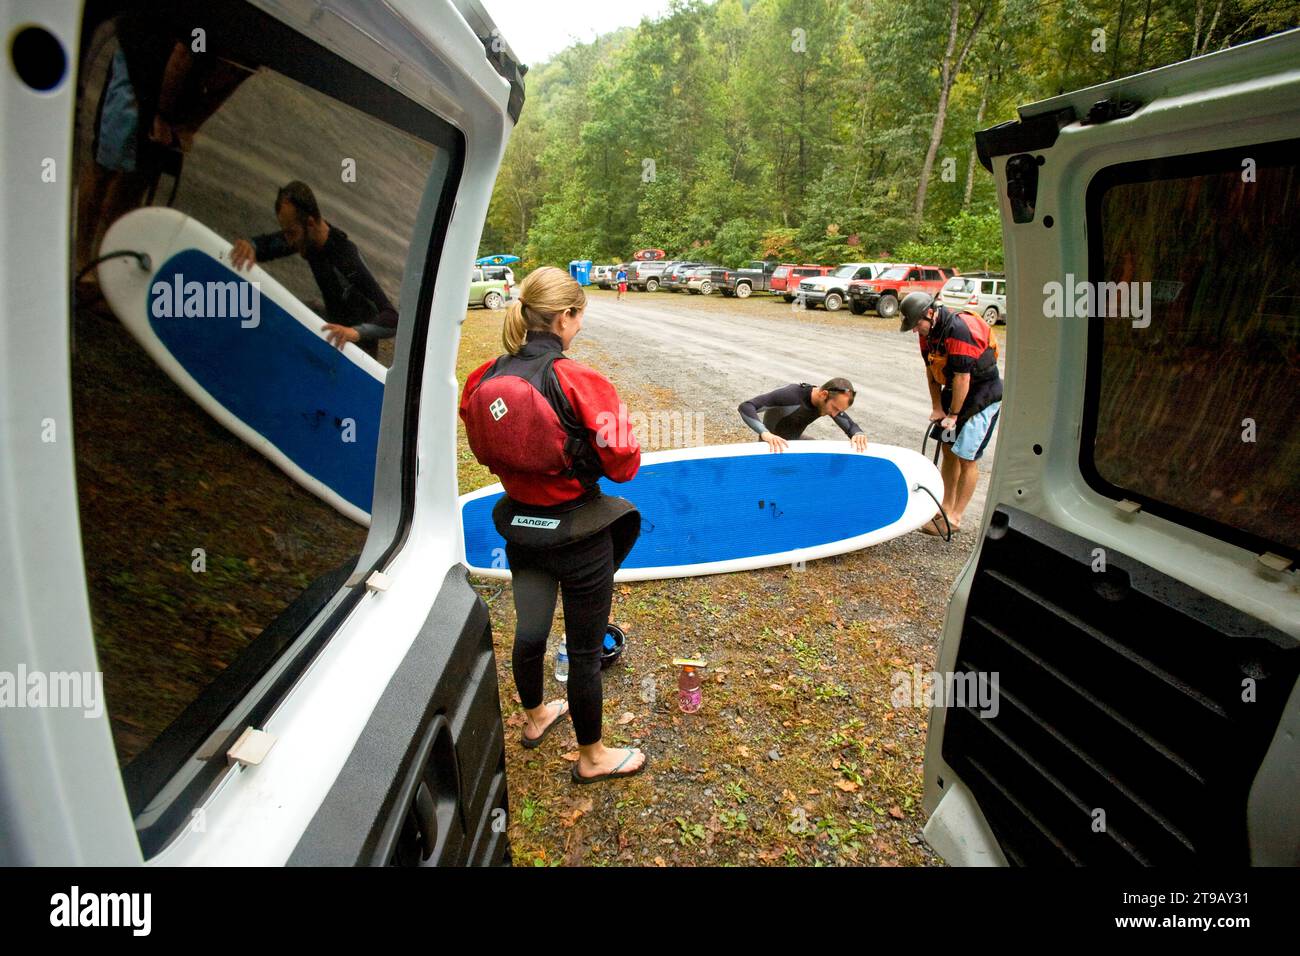 Woman watches while two men inflate a stand up paddleboard. Stock Photo